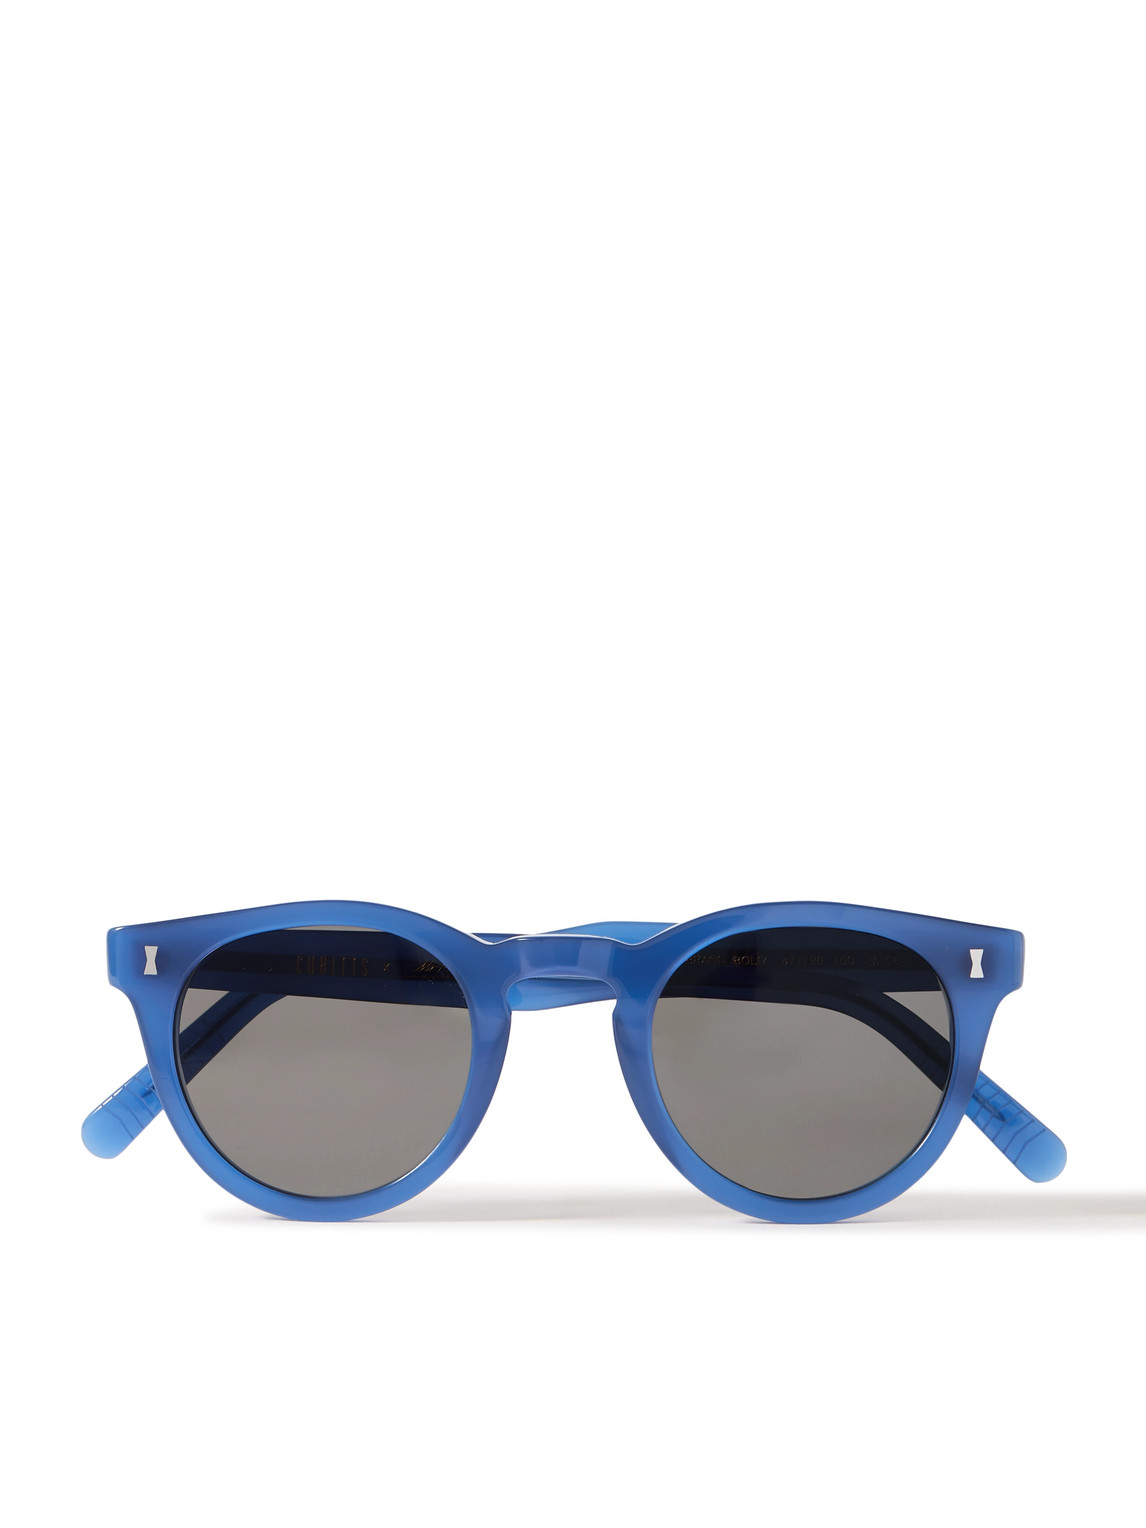 Cubitts Herbrand Round-Frame Acetate Sunglasses